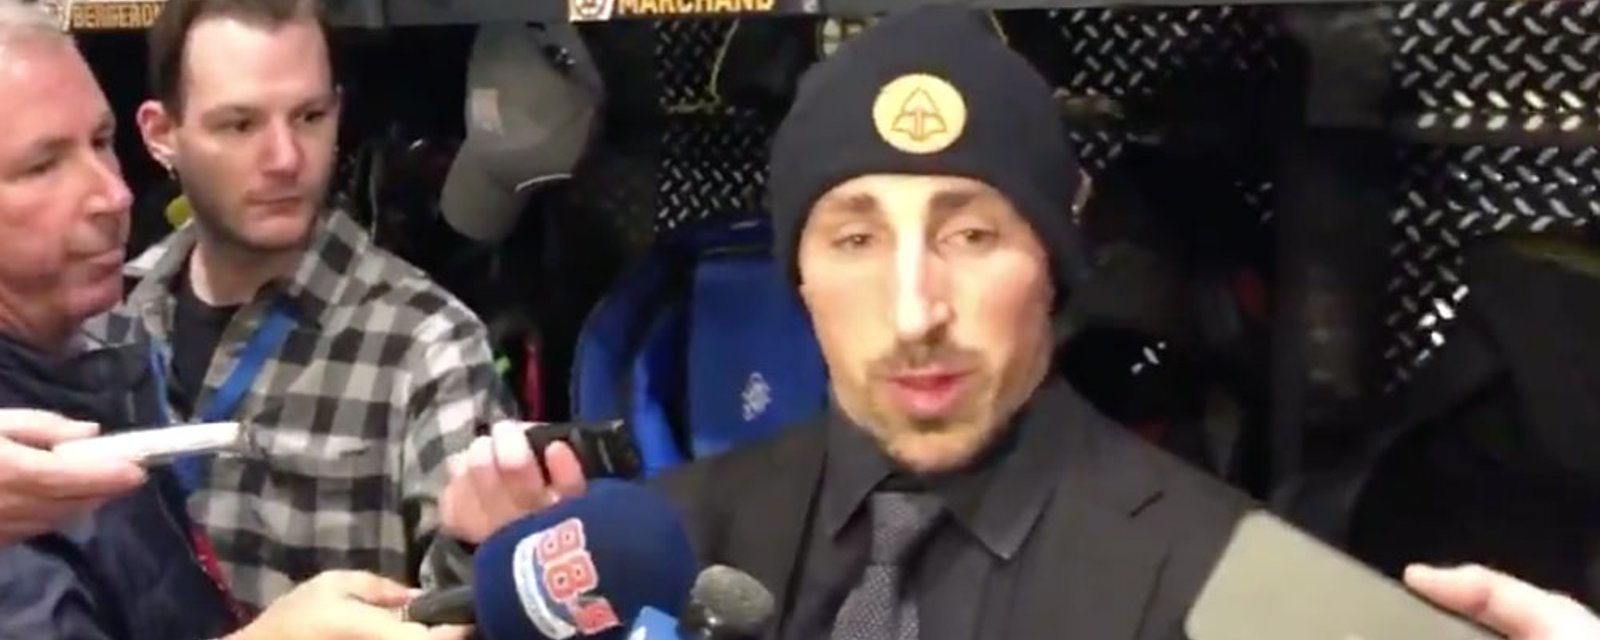 Marchand slams concussion spotter in brutal way after game! 